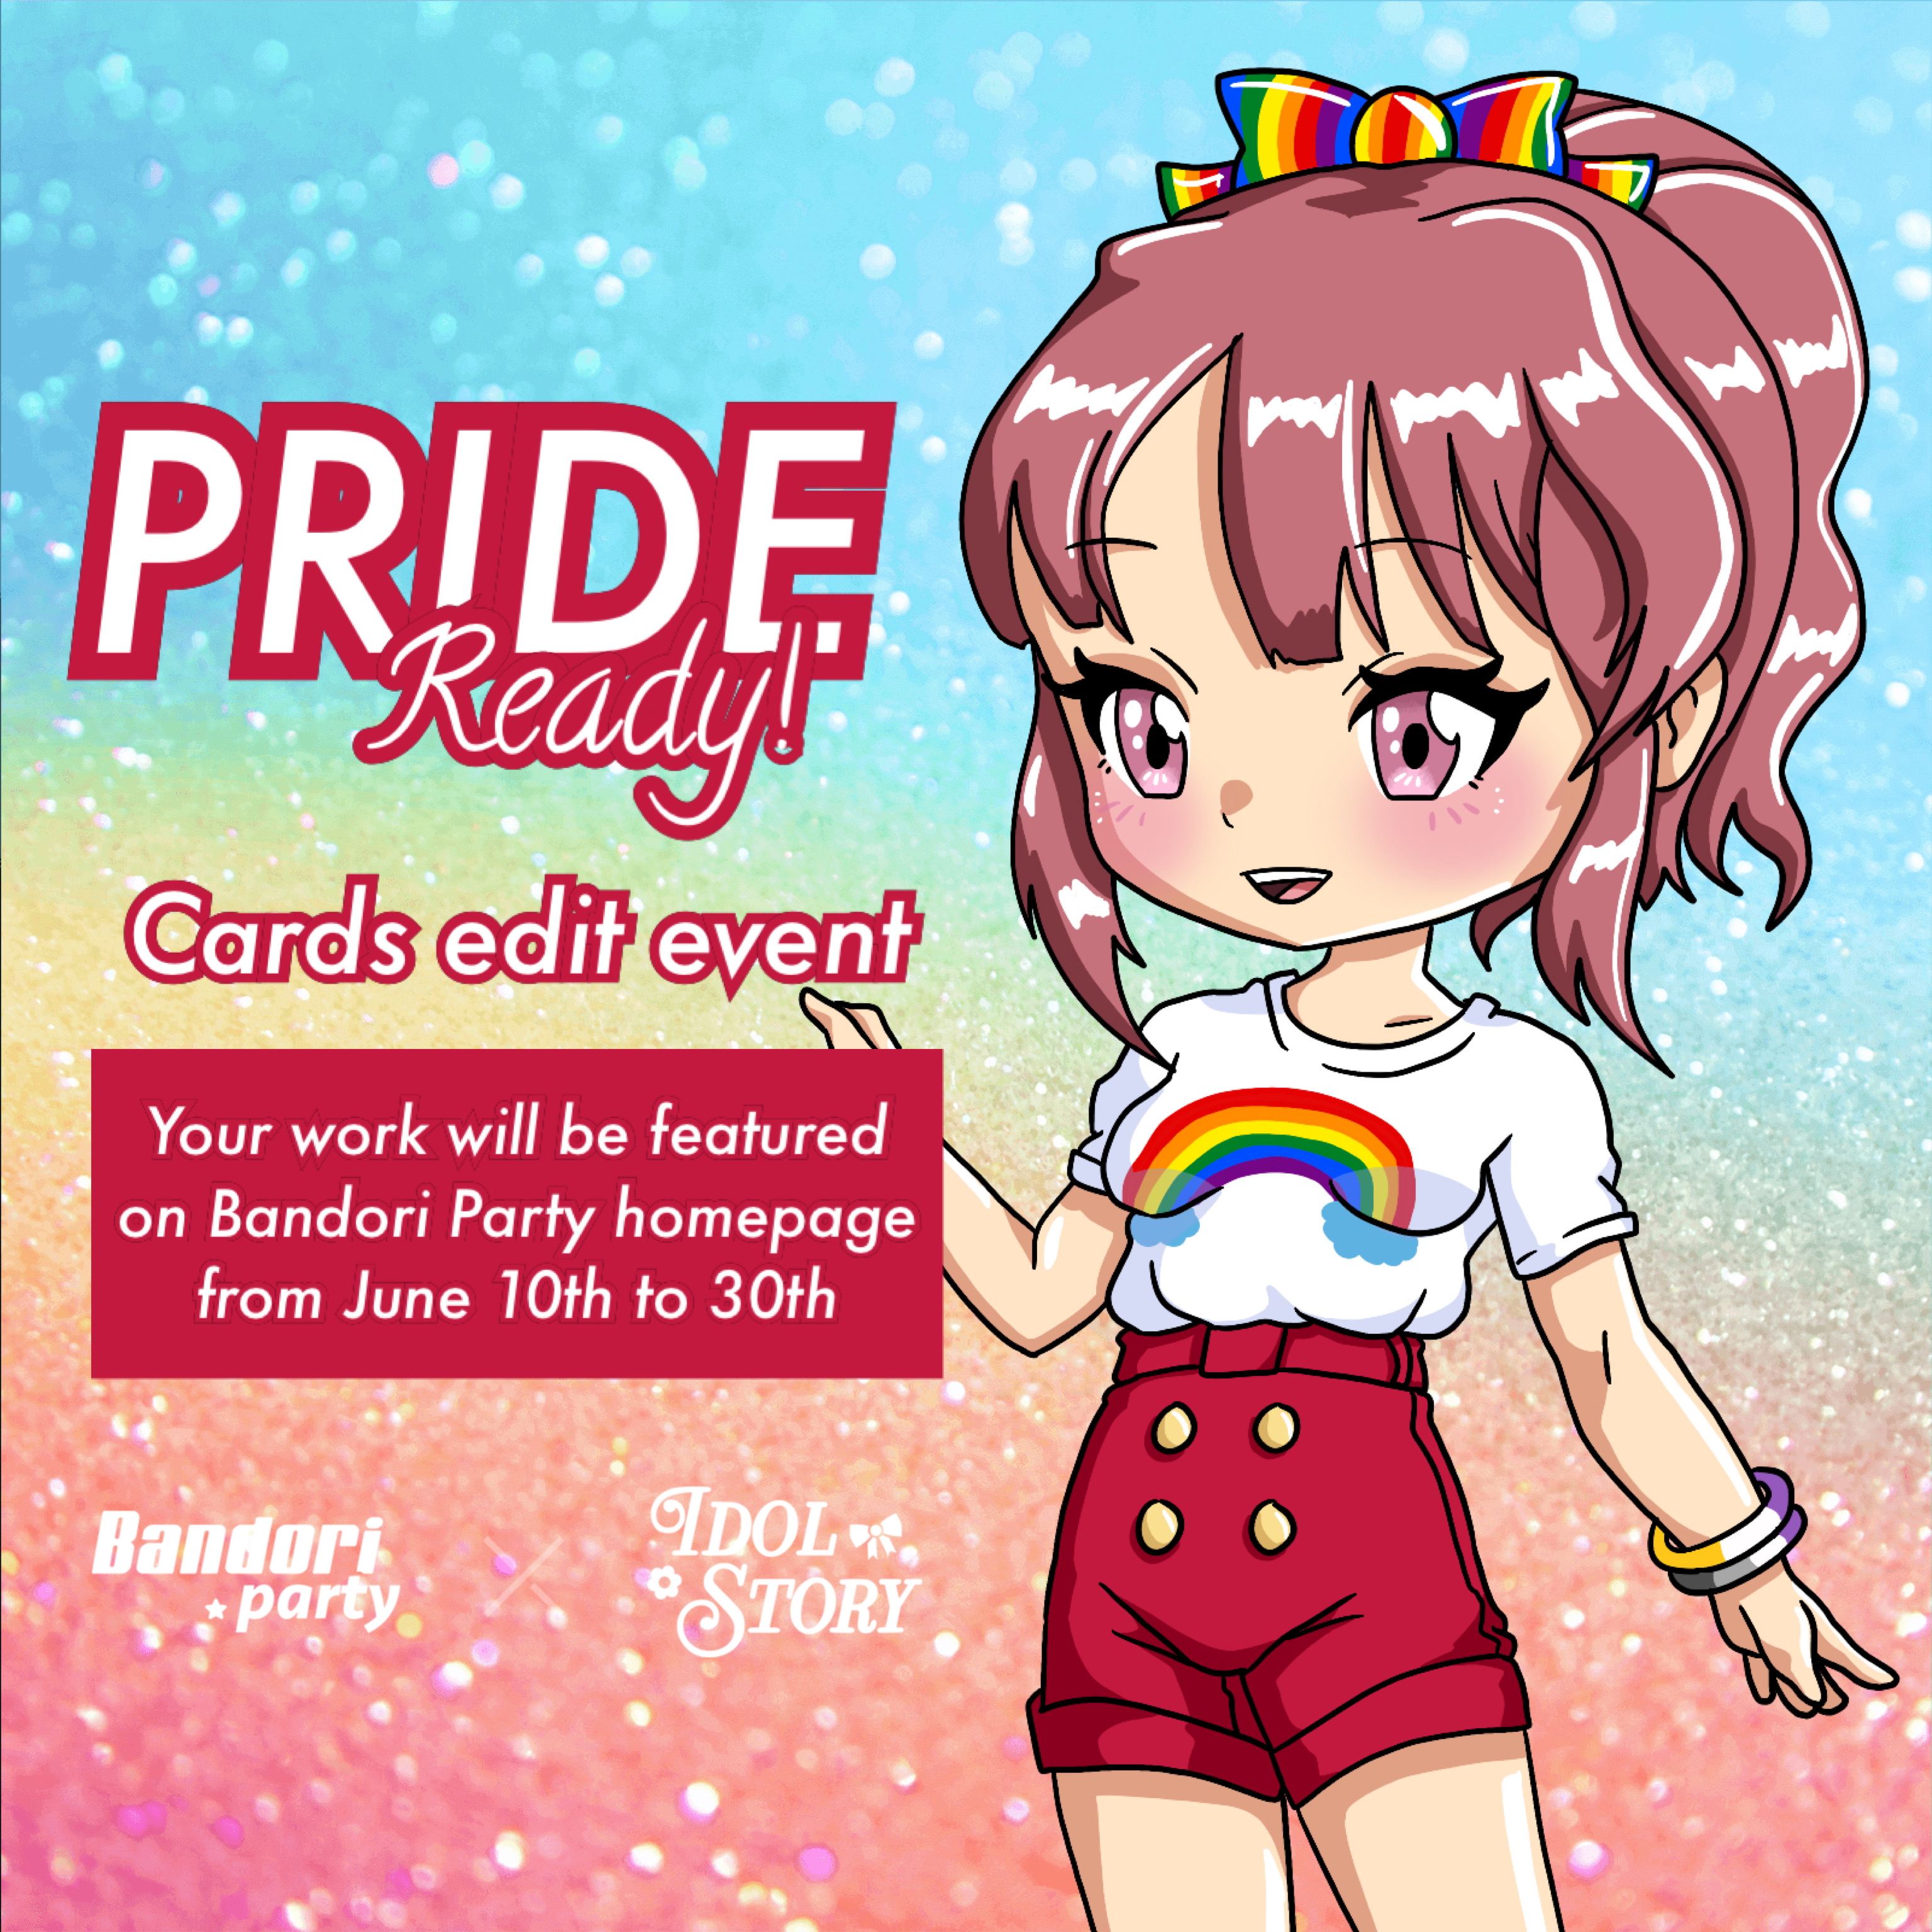   PRIDE Ready!  Cards edit event 

Happy pride month, everyone!

Bandori Party is proud to join...